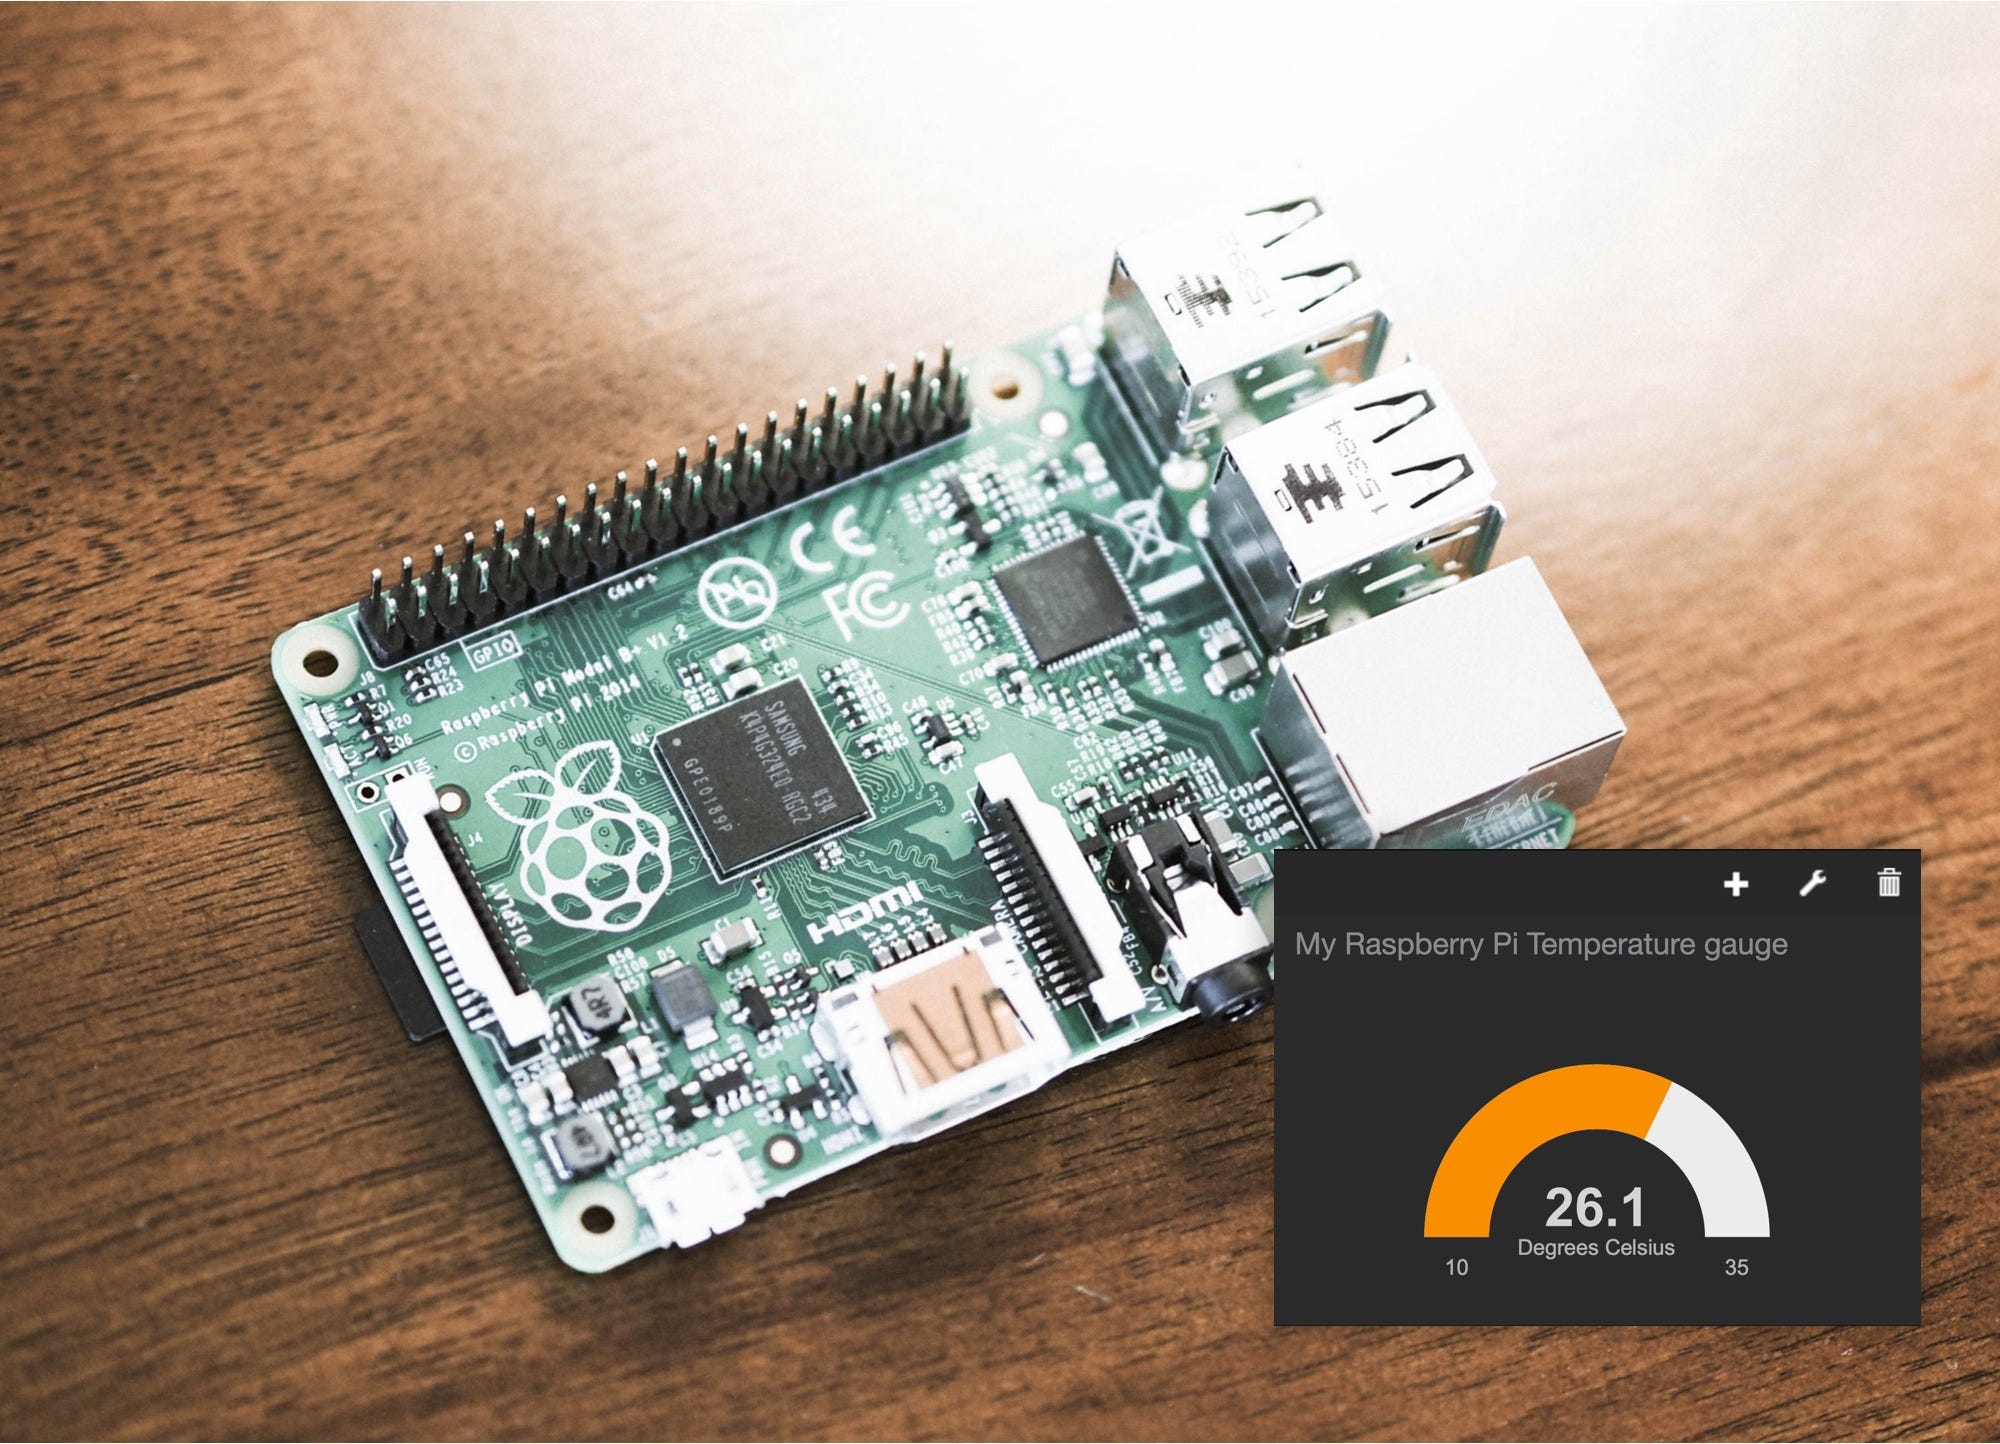 How to build a Raspberry Pi thermometer you can access anywhere (a  beginner's guide) | by Tim Fernando | dataplicity